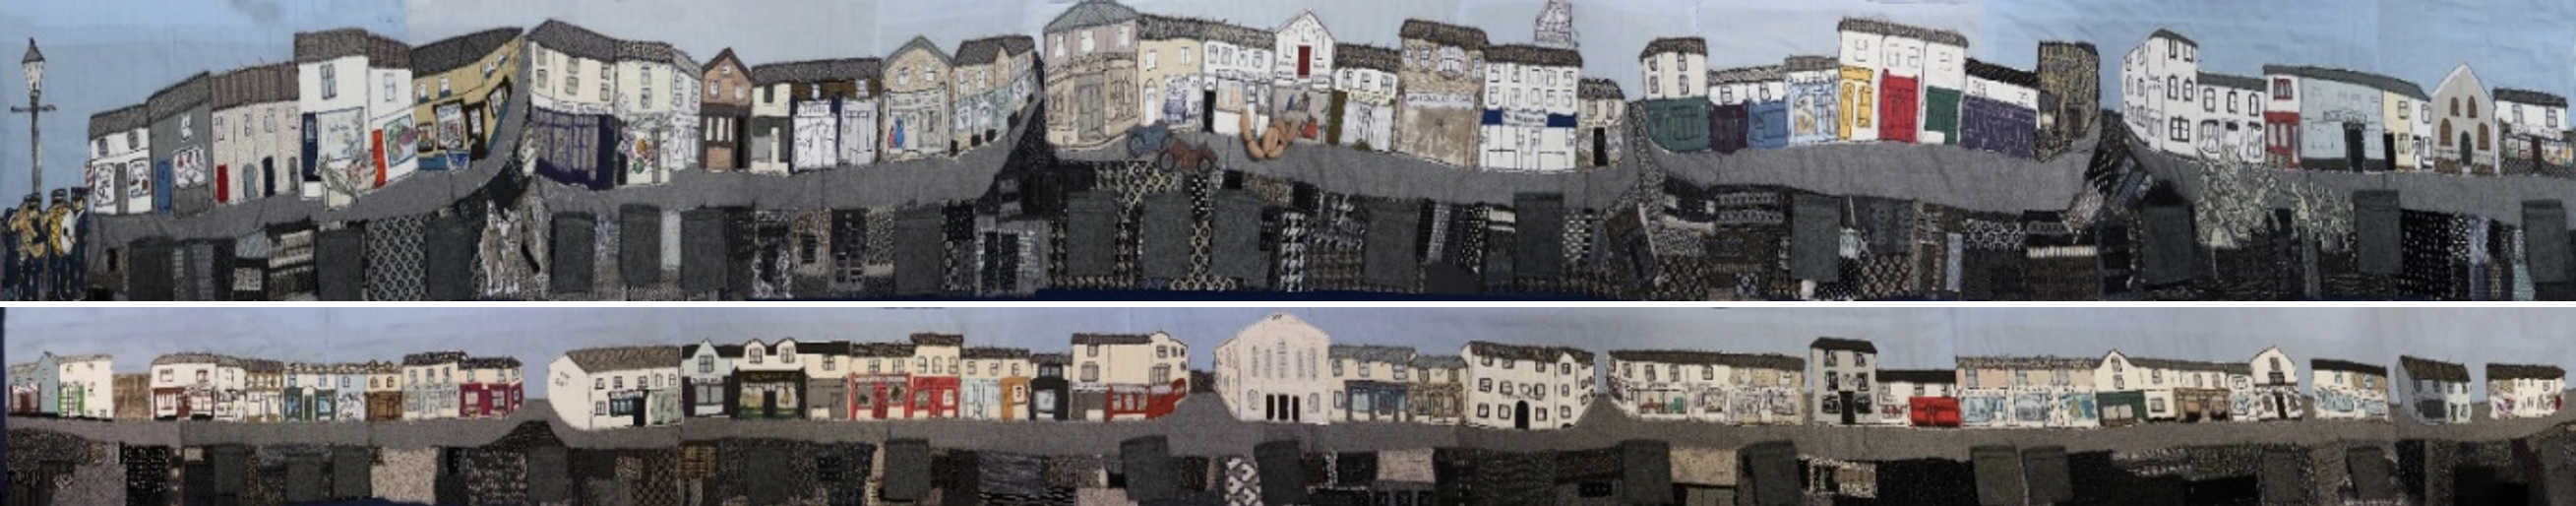 Blaenavon Townscape Heritage Town Tapestry: A Memory Map of Broad Street